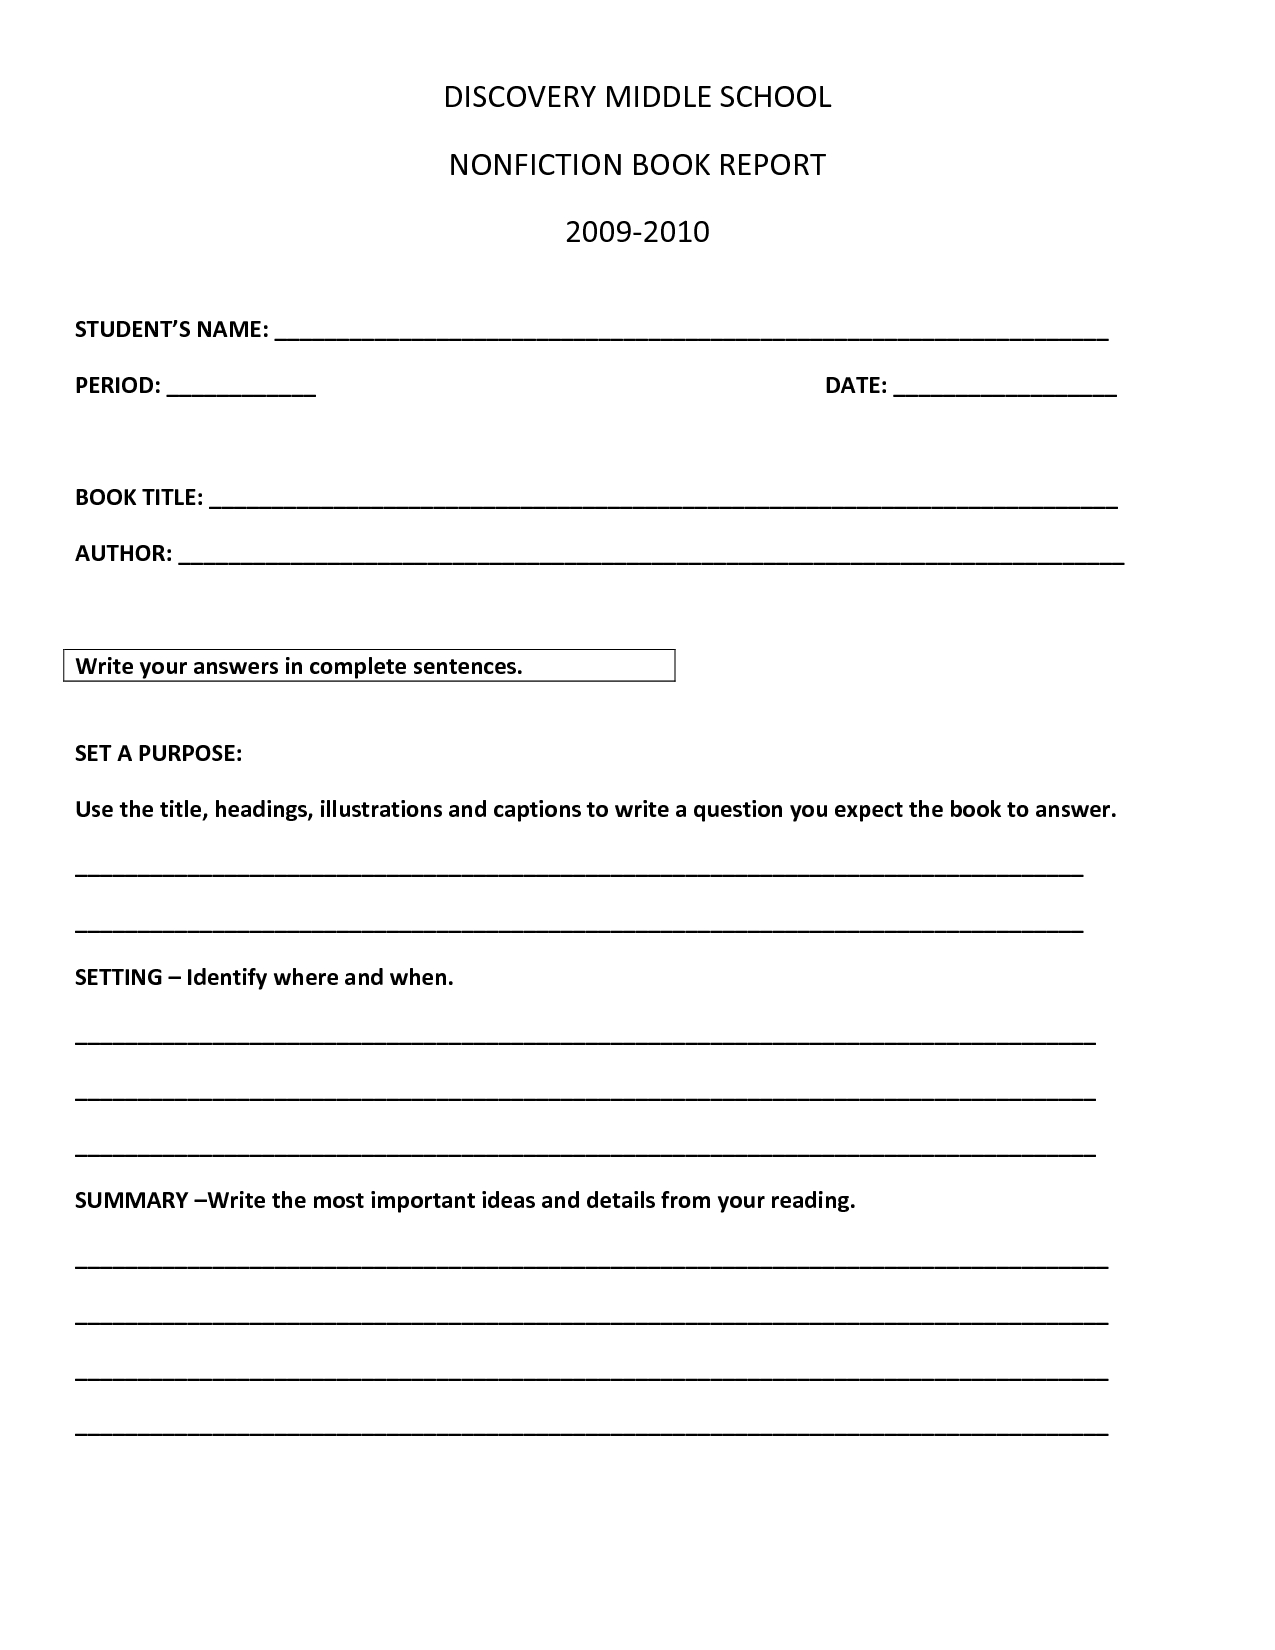 Book Report Template  Discovery Middle School Nonfiction Book with Middle School Book Report Template